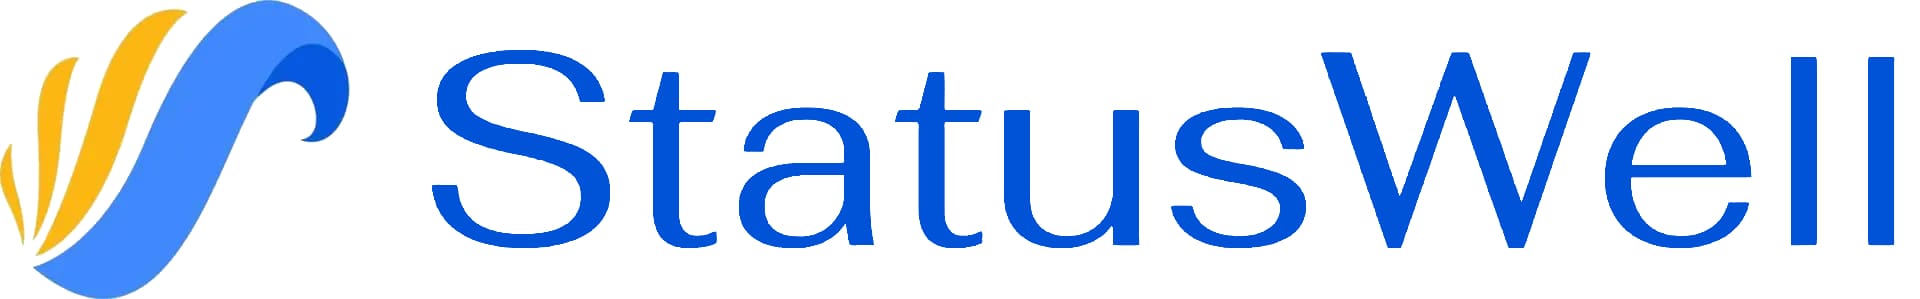 A blue logo of natus is shown.